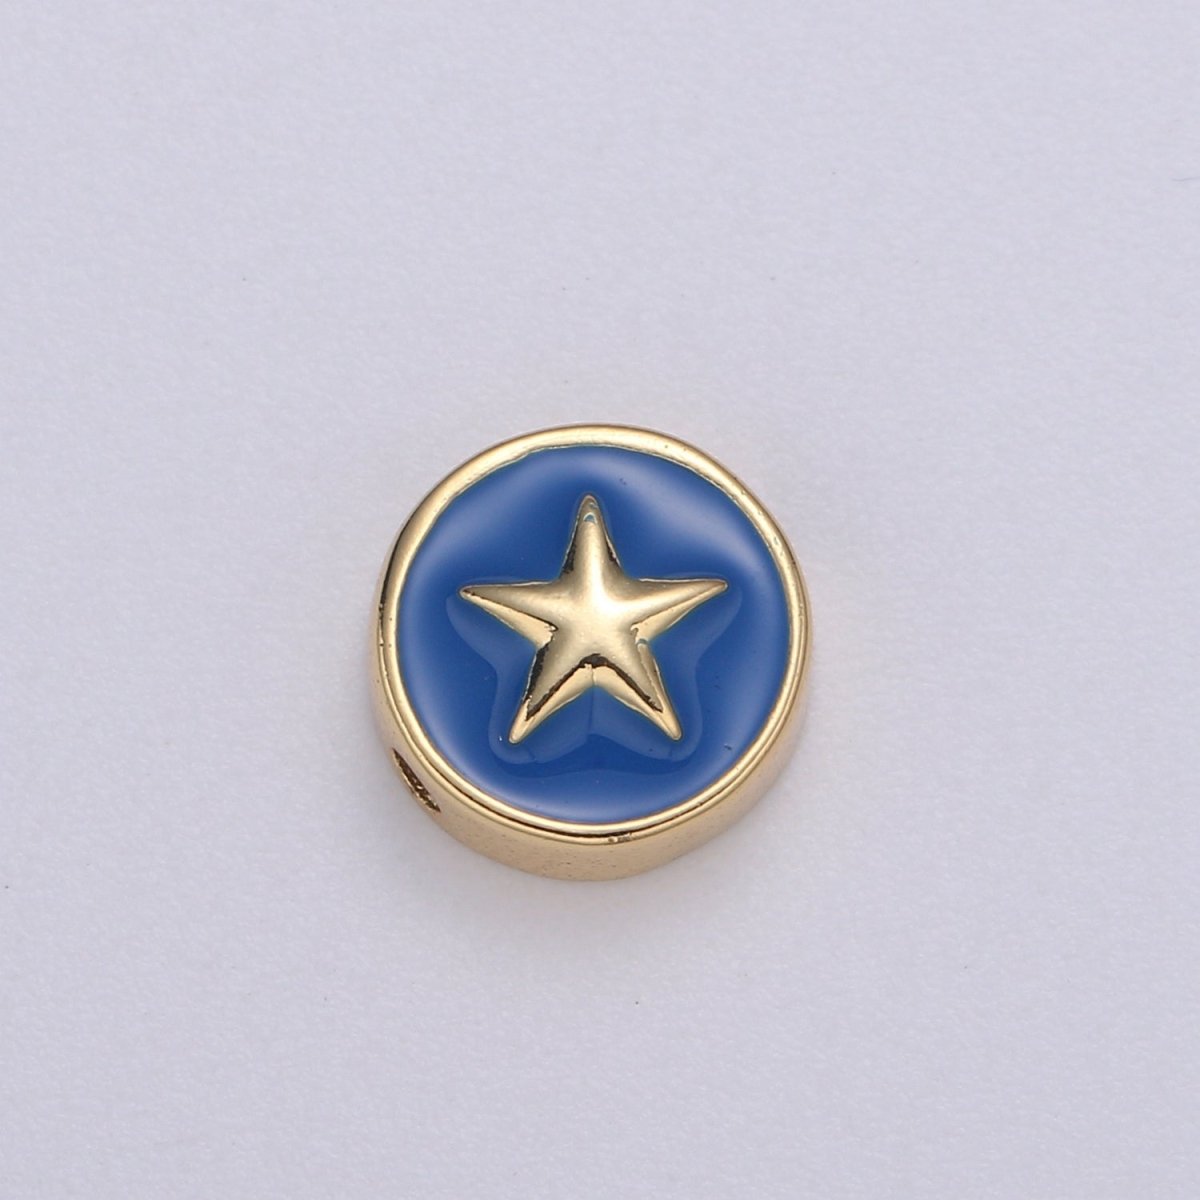 Round Enamel Tiny Gold Star - 24k Gold filled Round Beads - 10mm beads for bracelet making supply Celestial Jewelry making B-471 to B-480 - DLUXCA